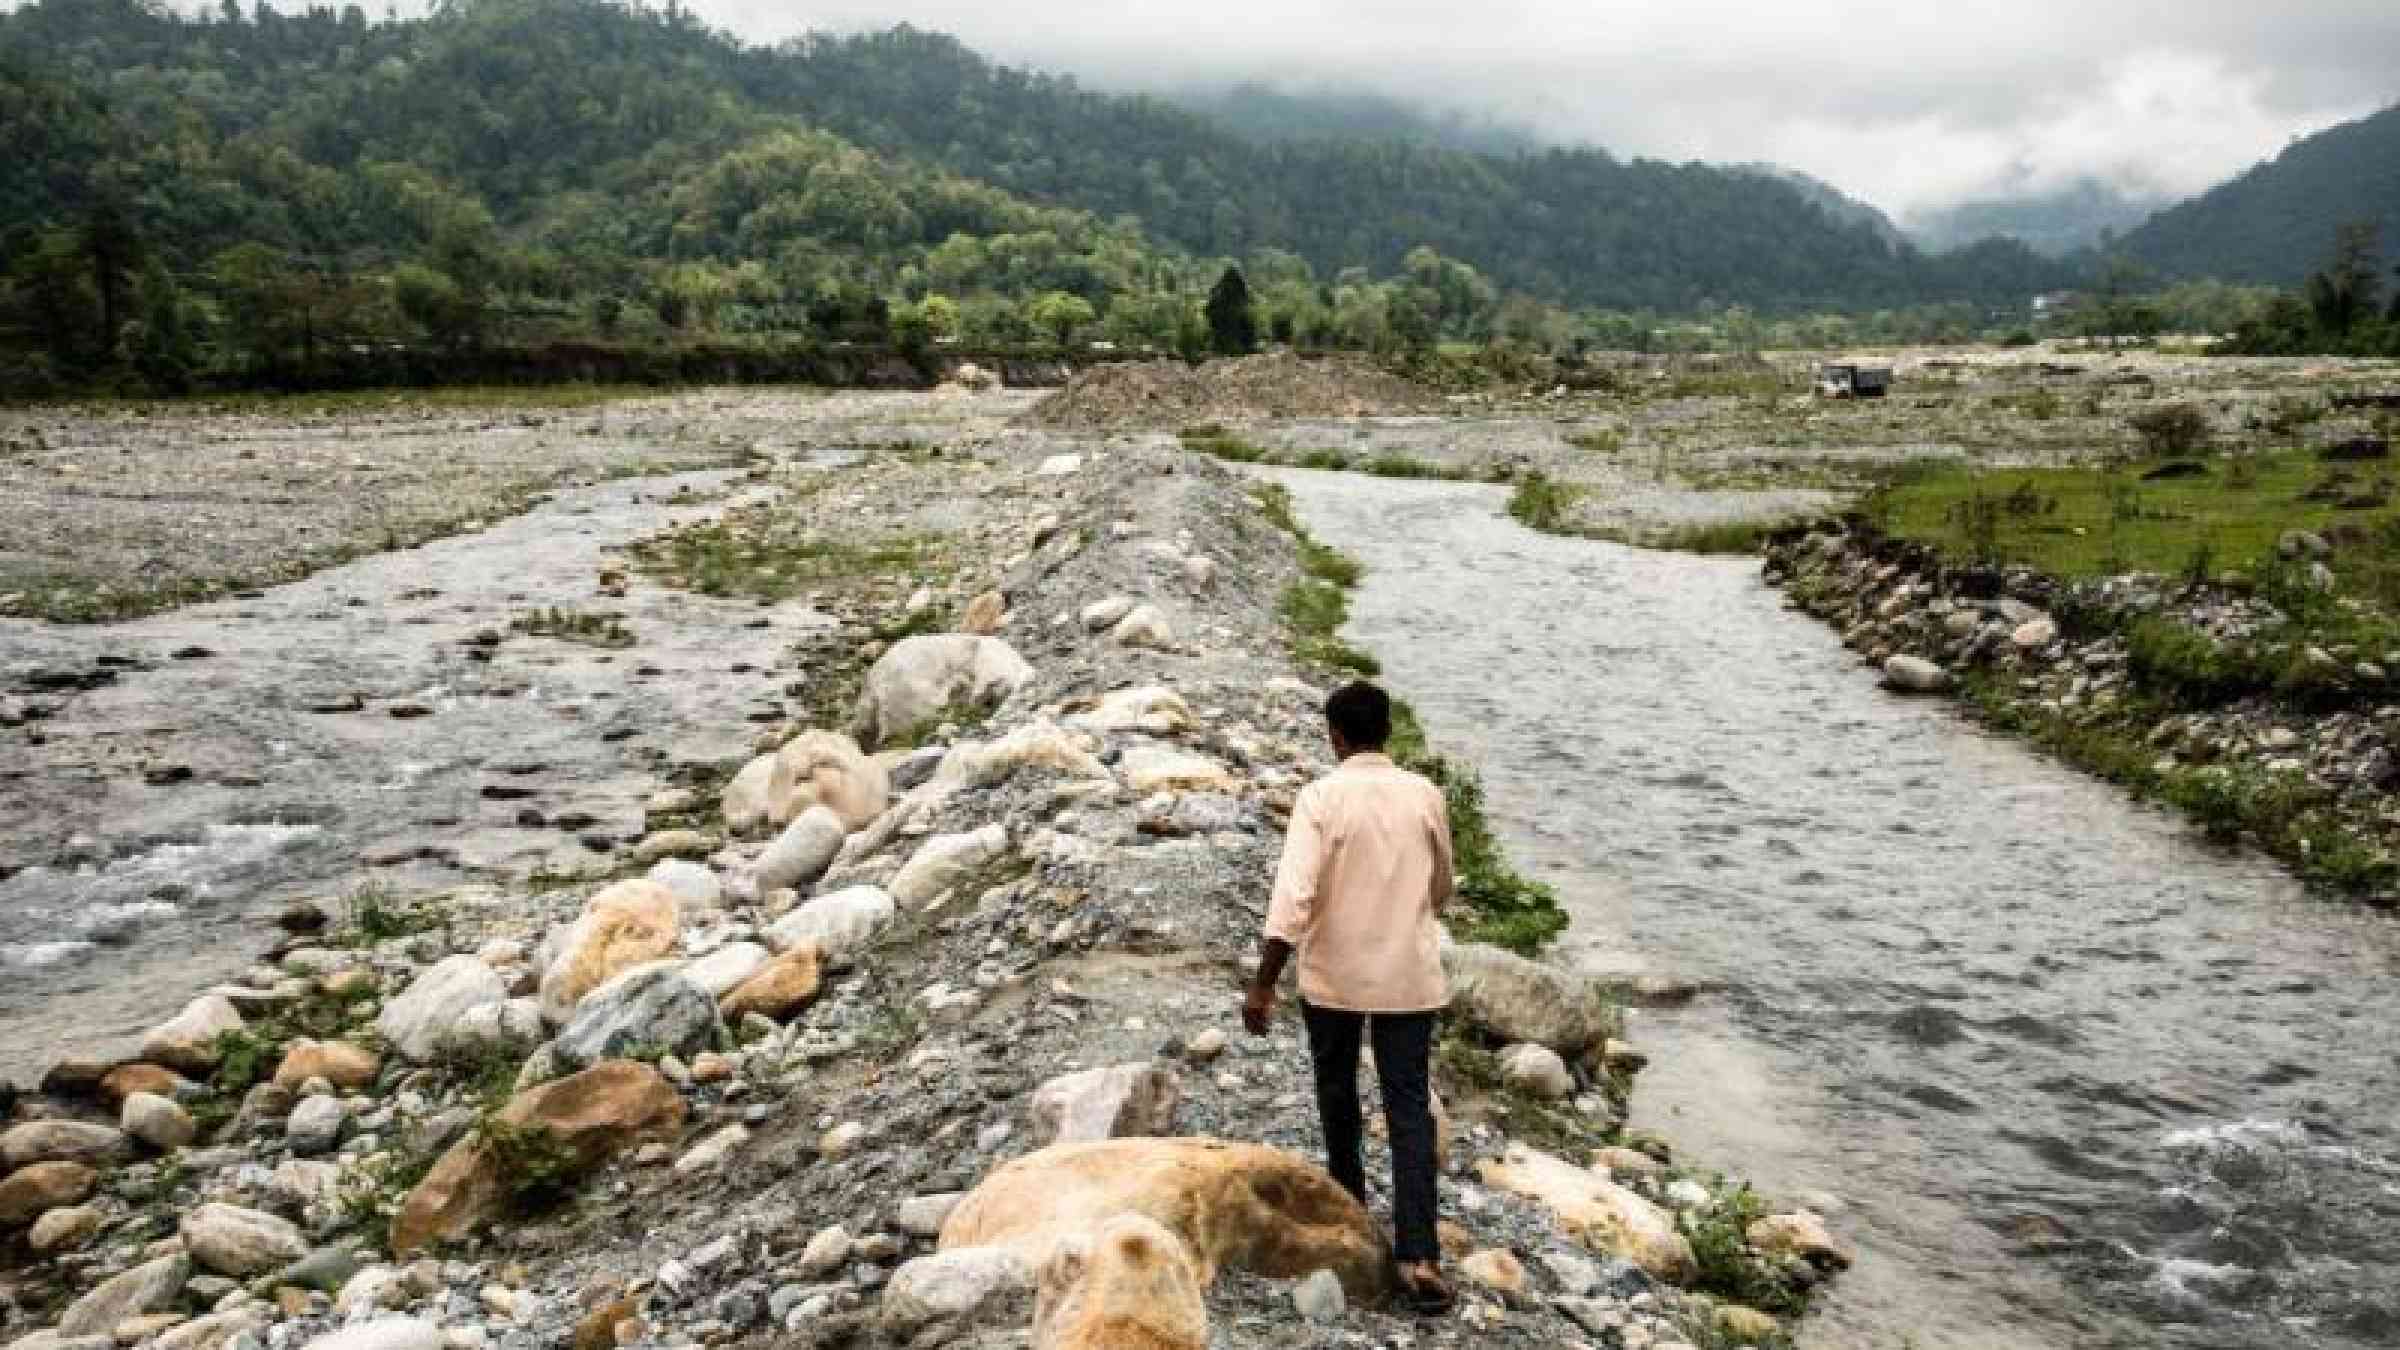 Bhutan's Sarbhang Chu river is called the Saralbhanga after it crosses into India to meet the Brahmaputra river (image by Shailendra Yashwant)